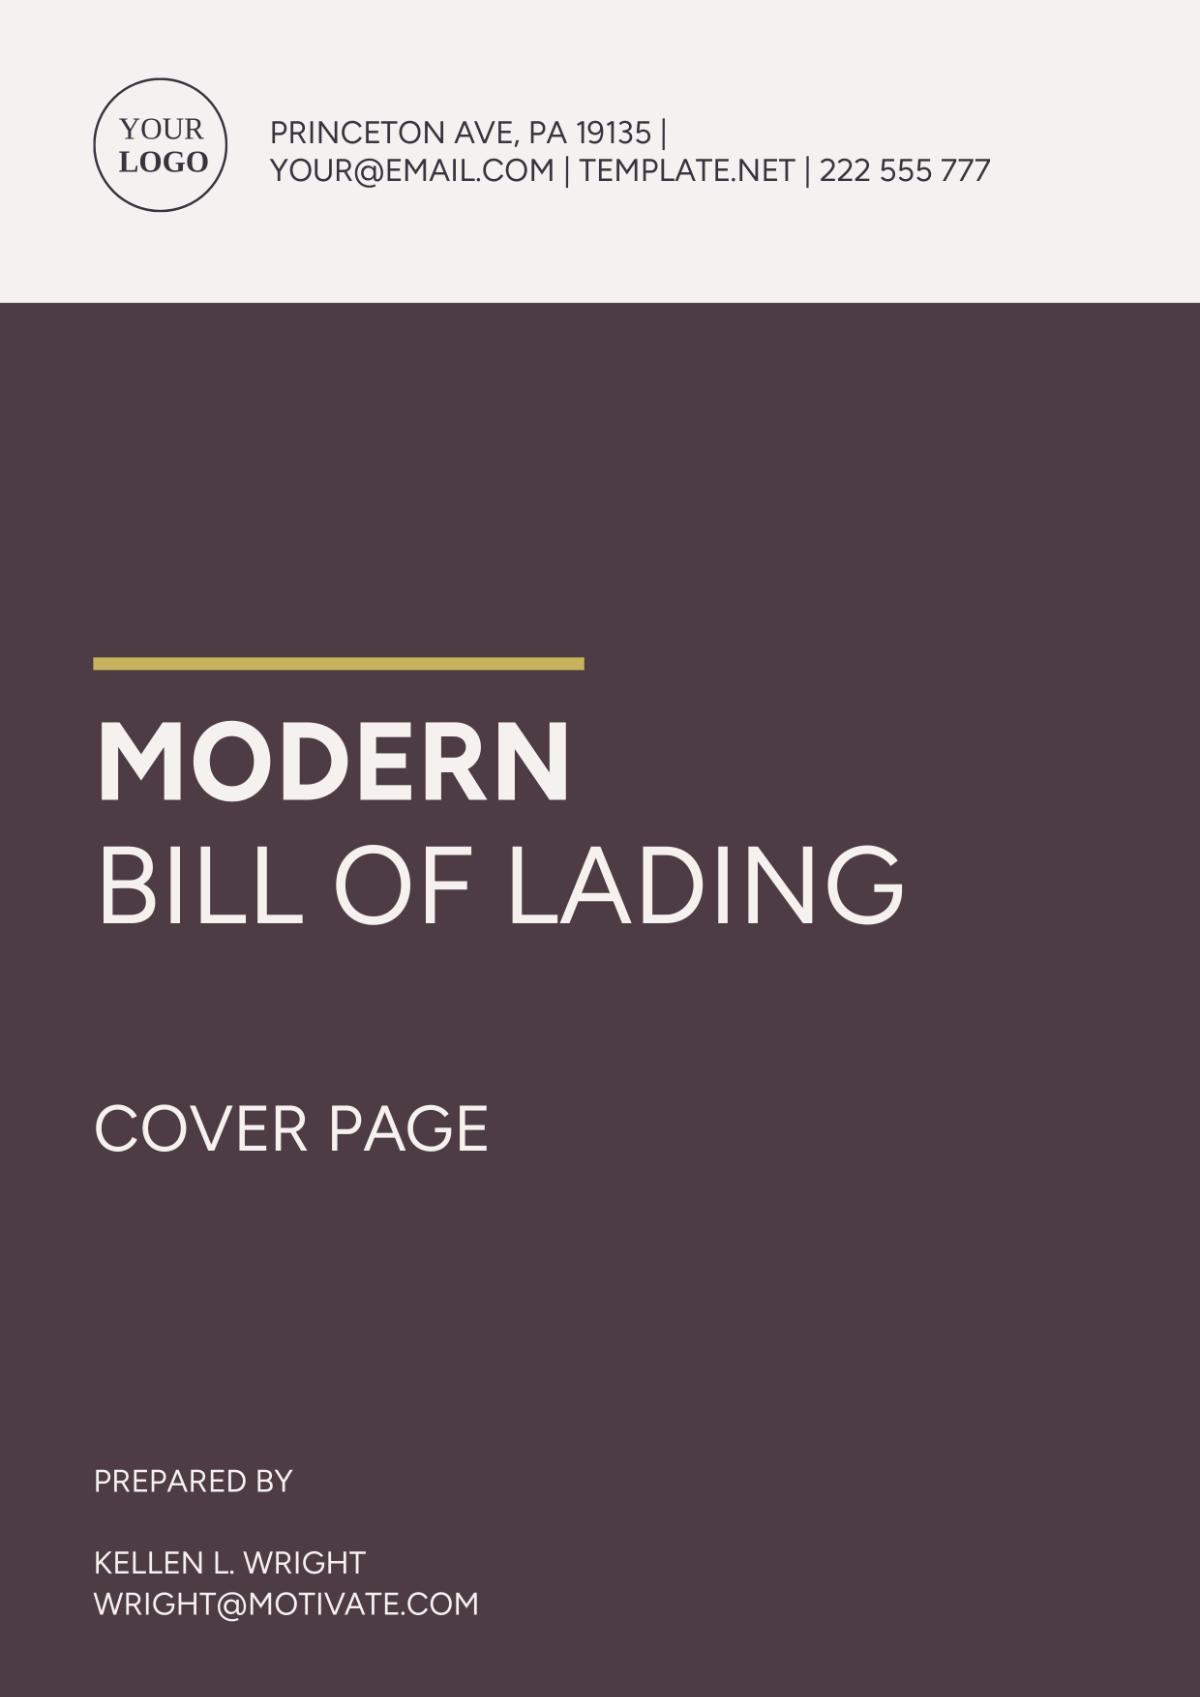 Modern Bill of Lading Cover Page